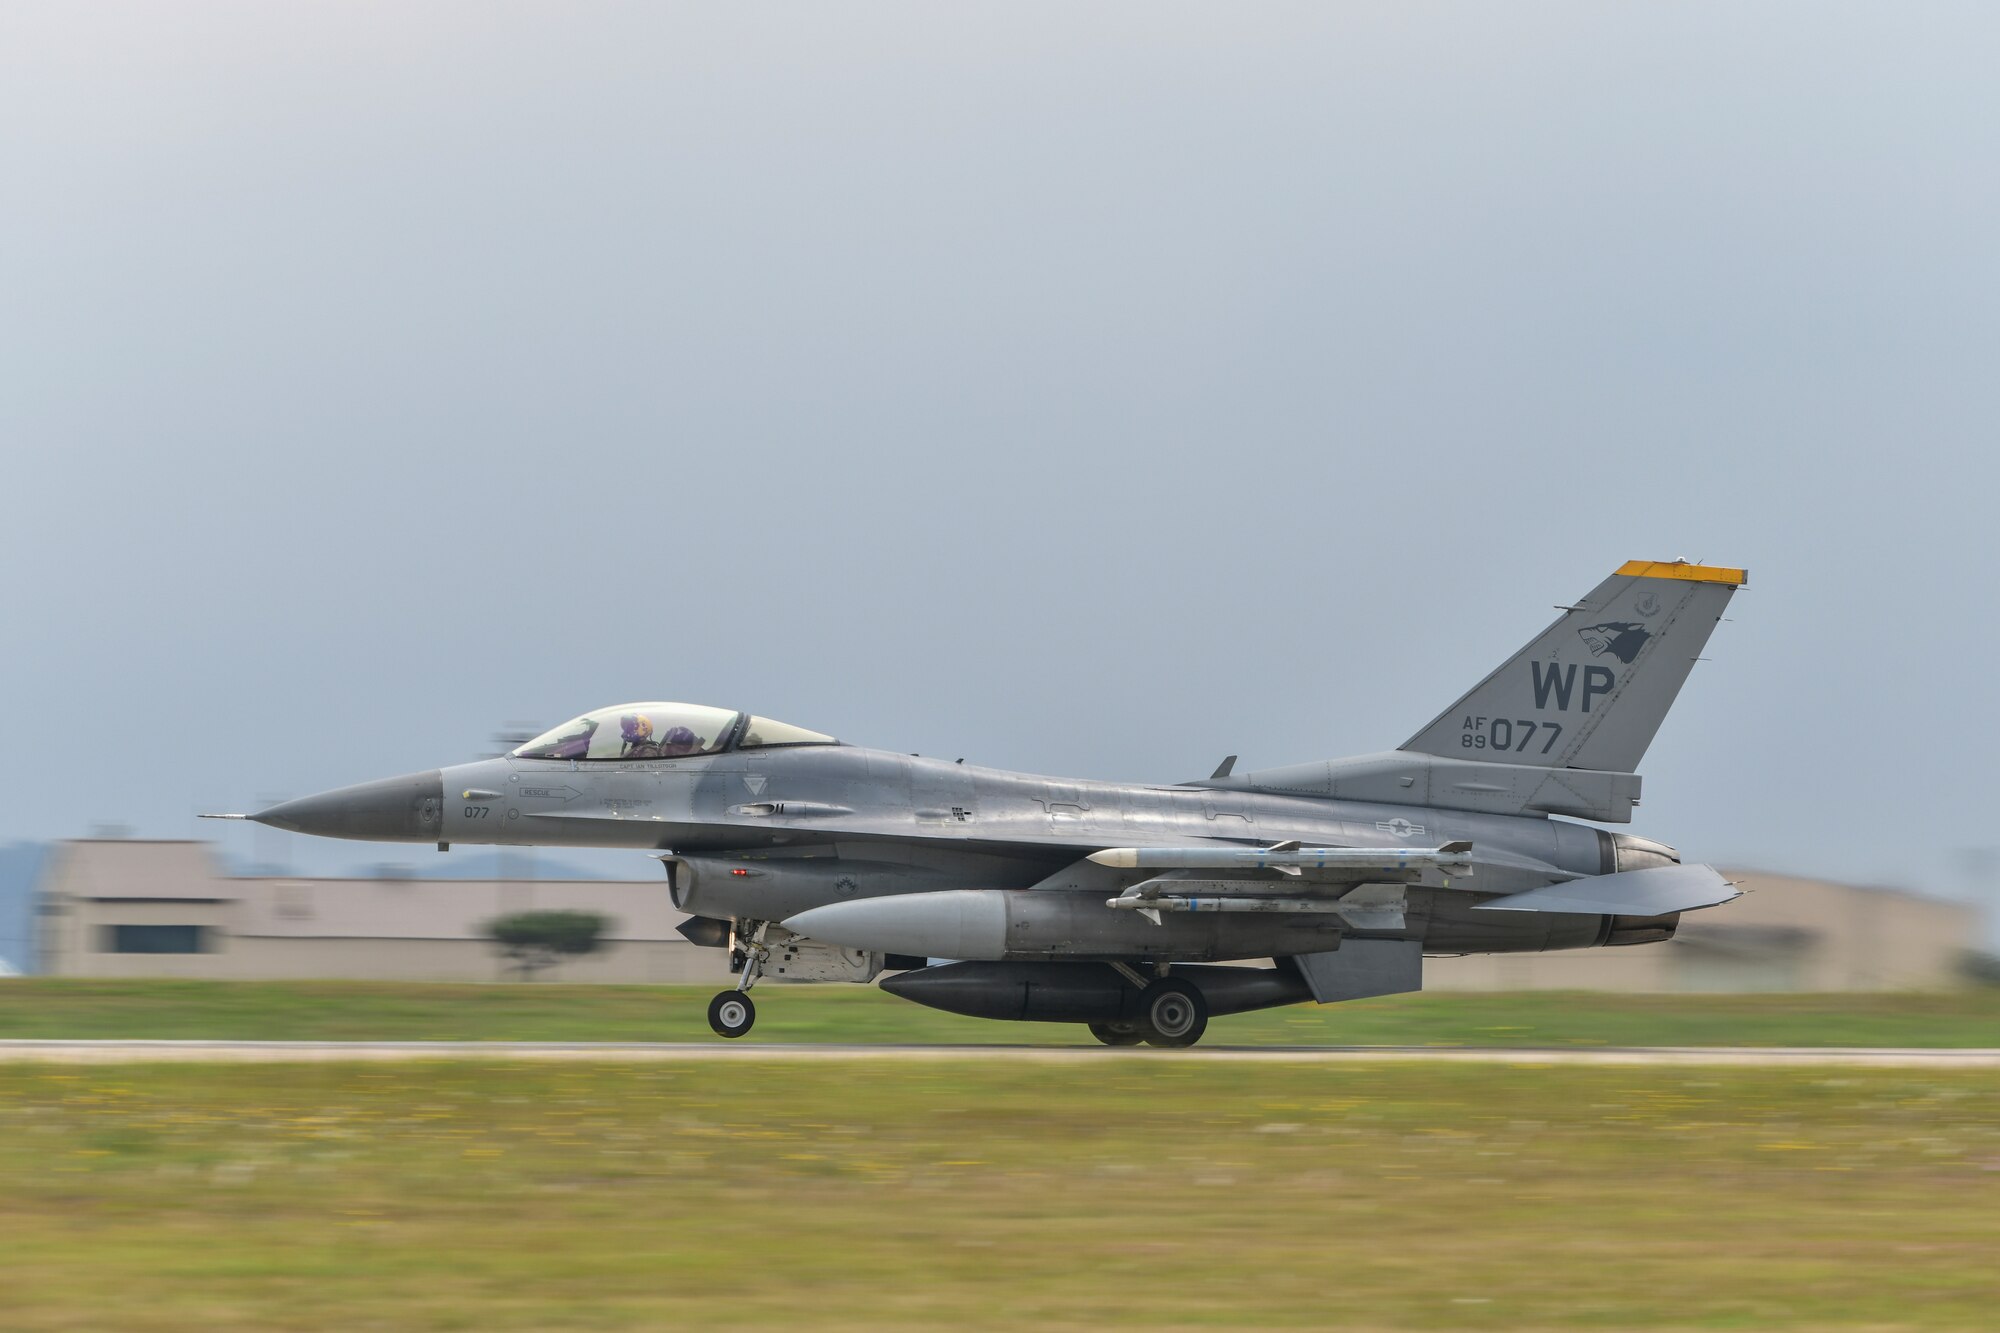 Photo of a U.S. Air Force F-16 Fighting Falcon